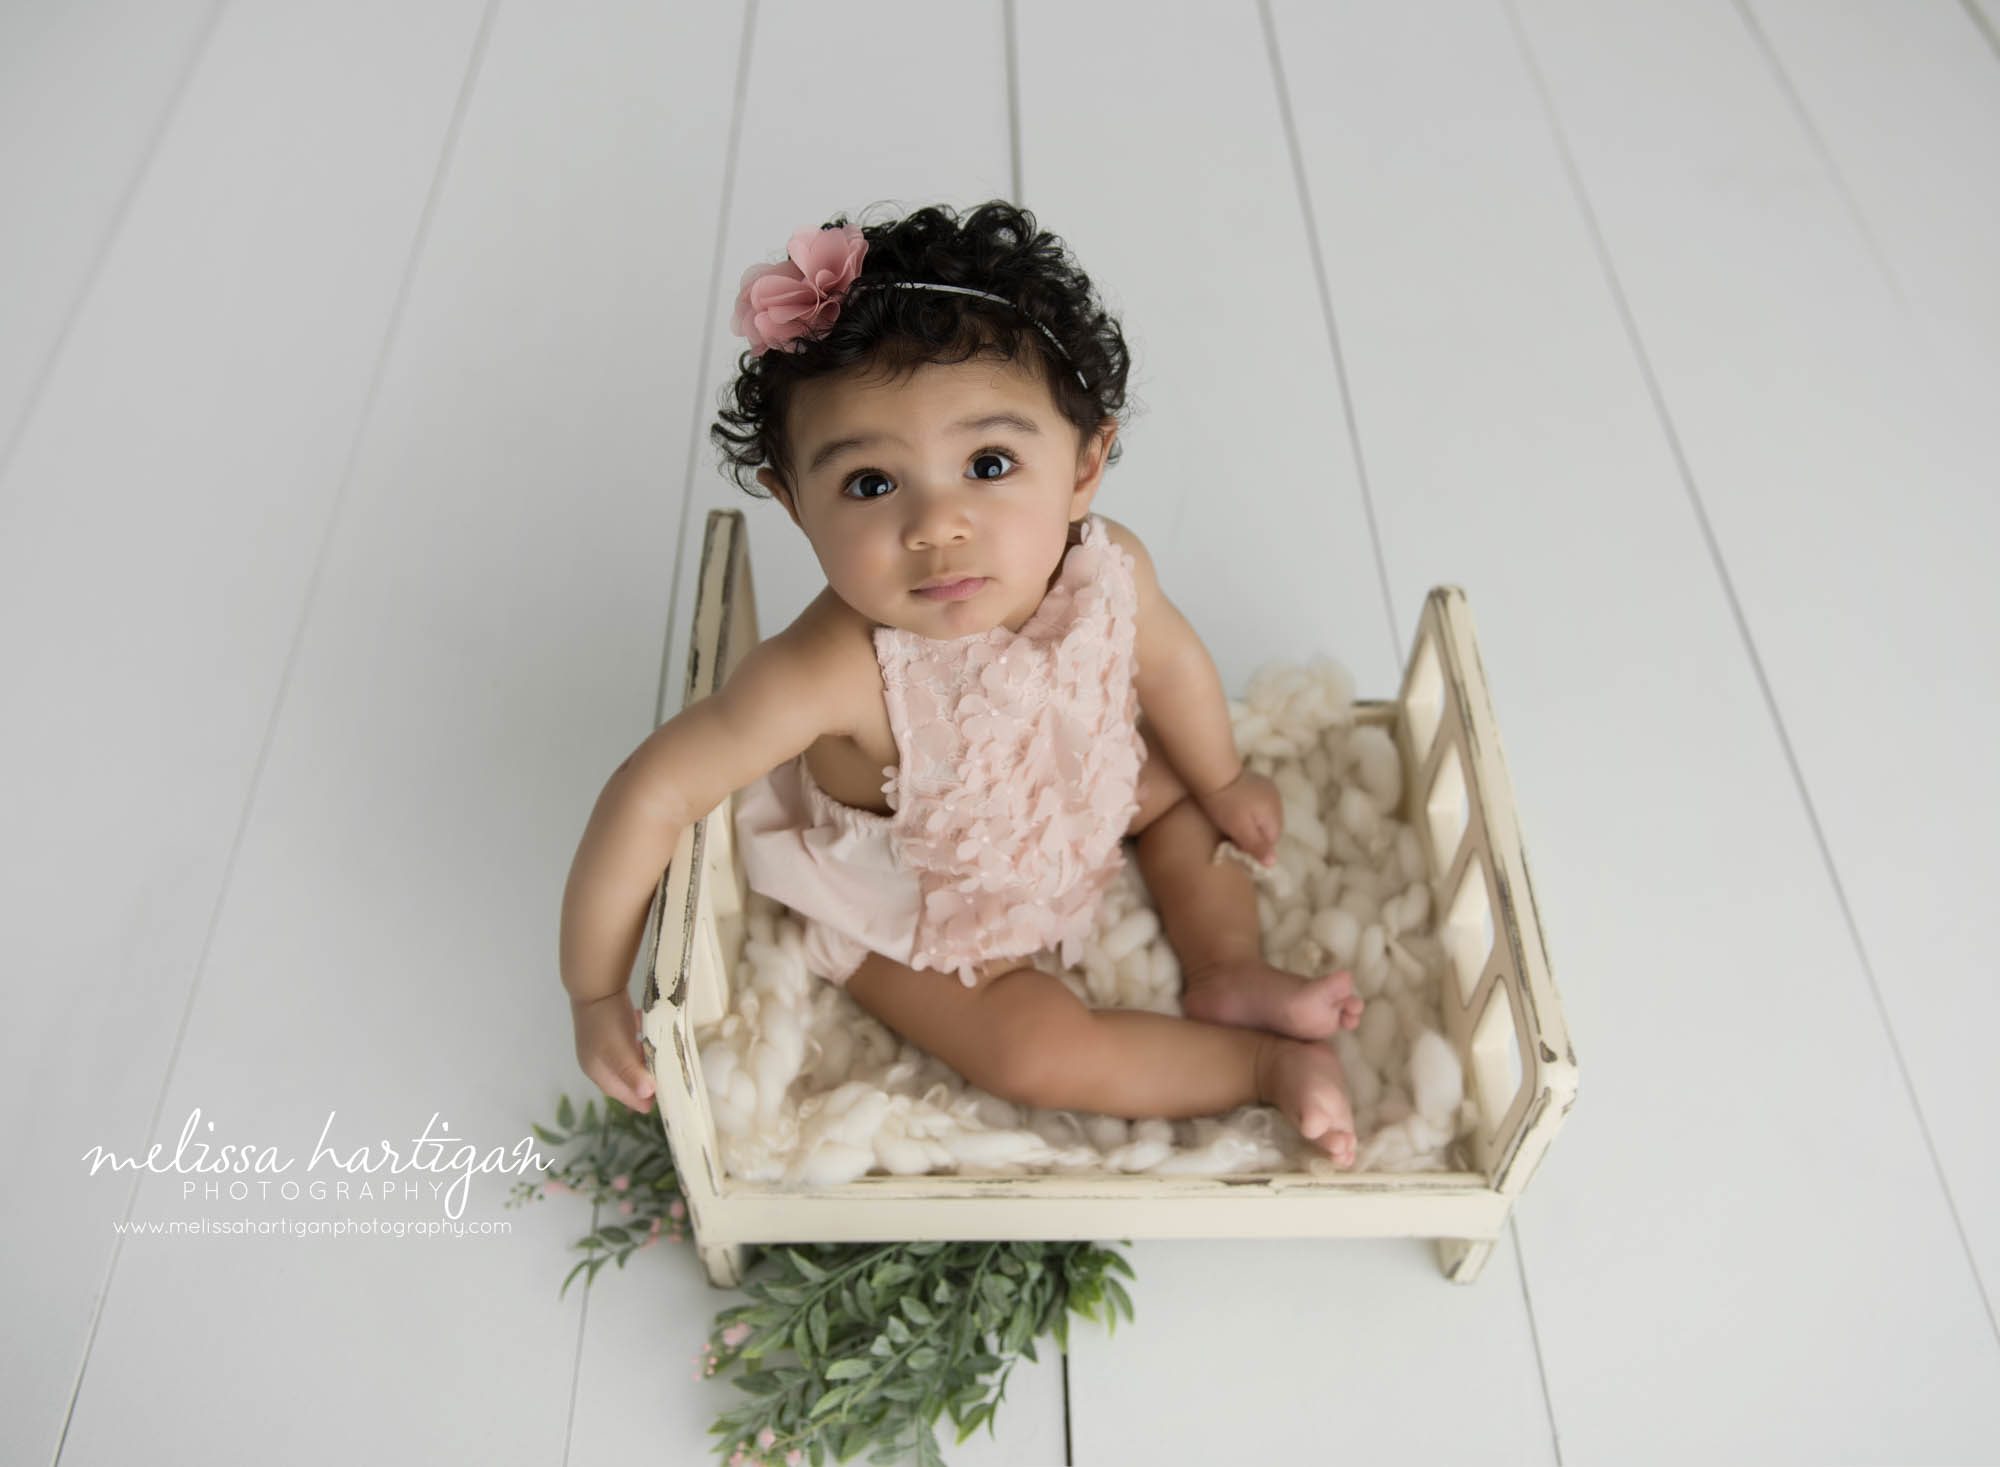 baby girl sitting on wooden bed prop looking up at camera